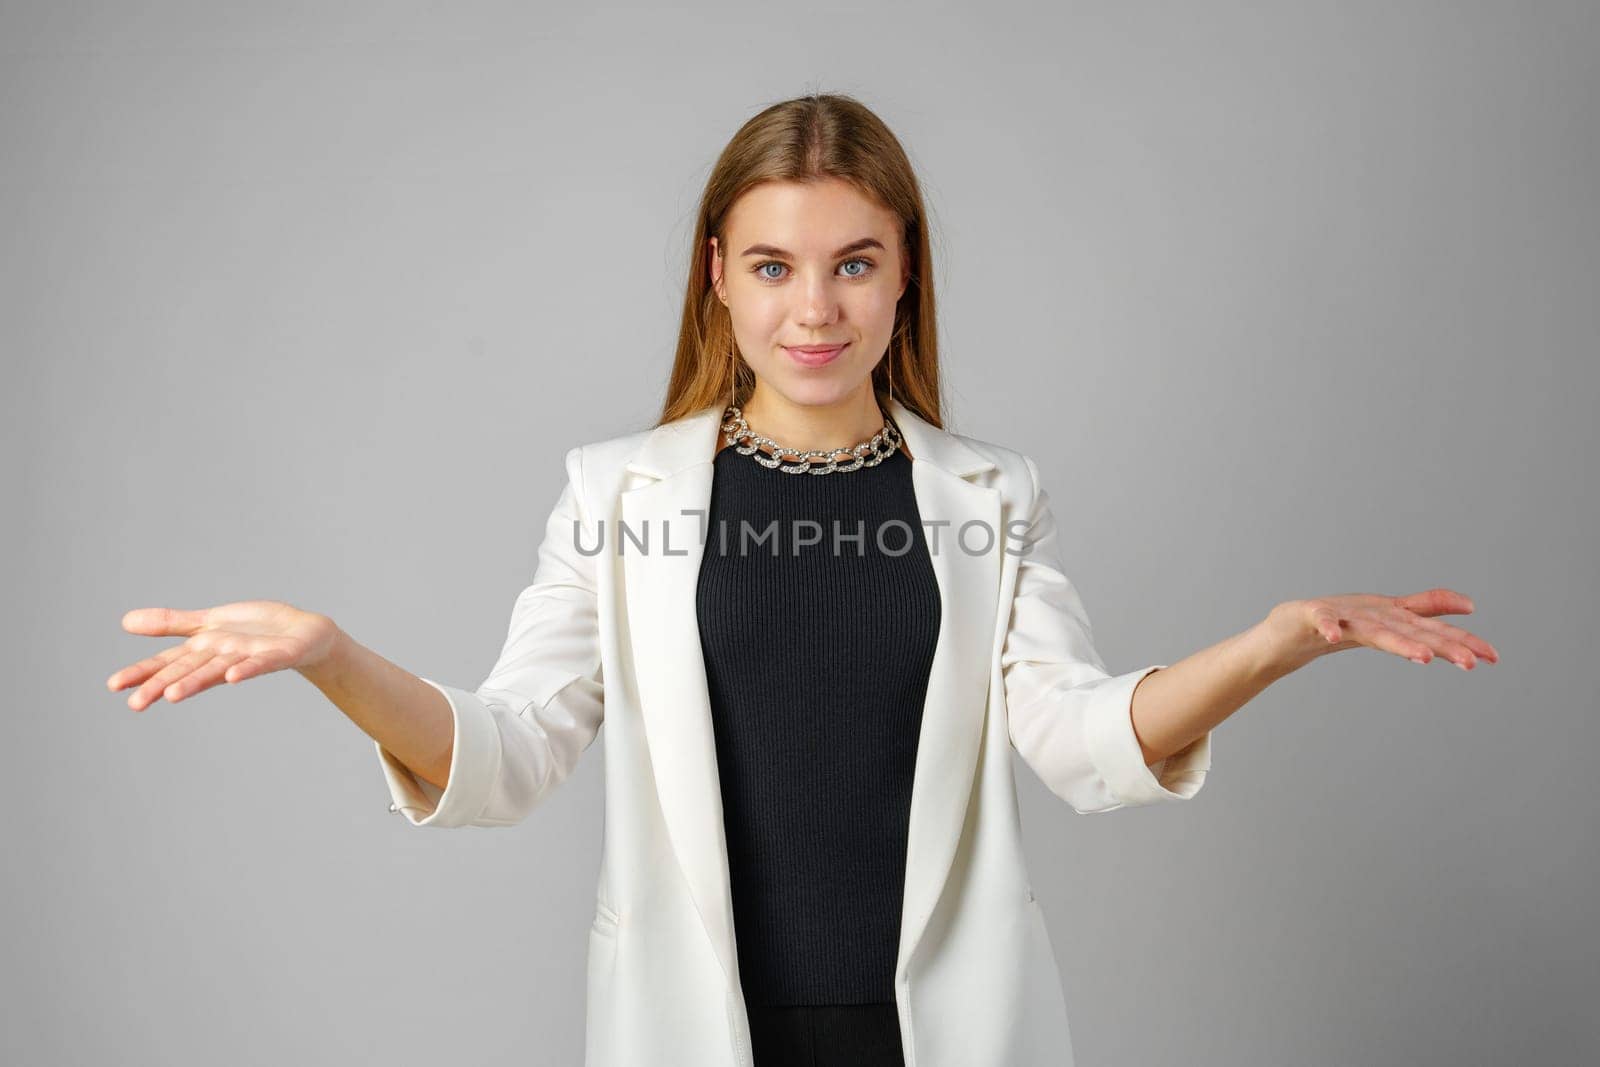 Young Woman Expressing Confusion With Hands Raised Against a Grey Background by Fabrikasimf